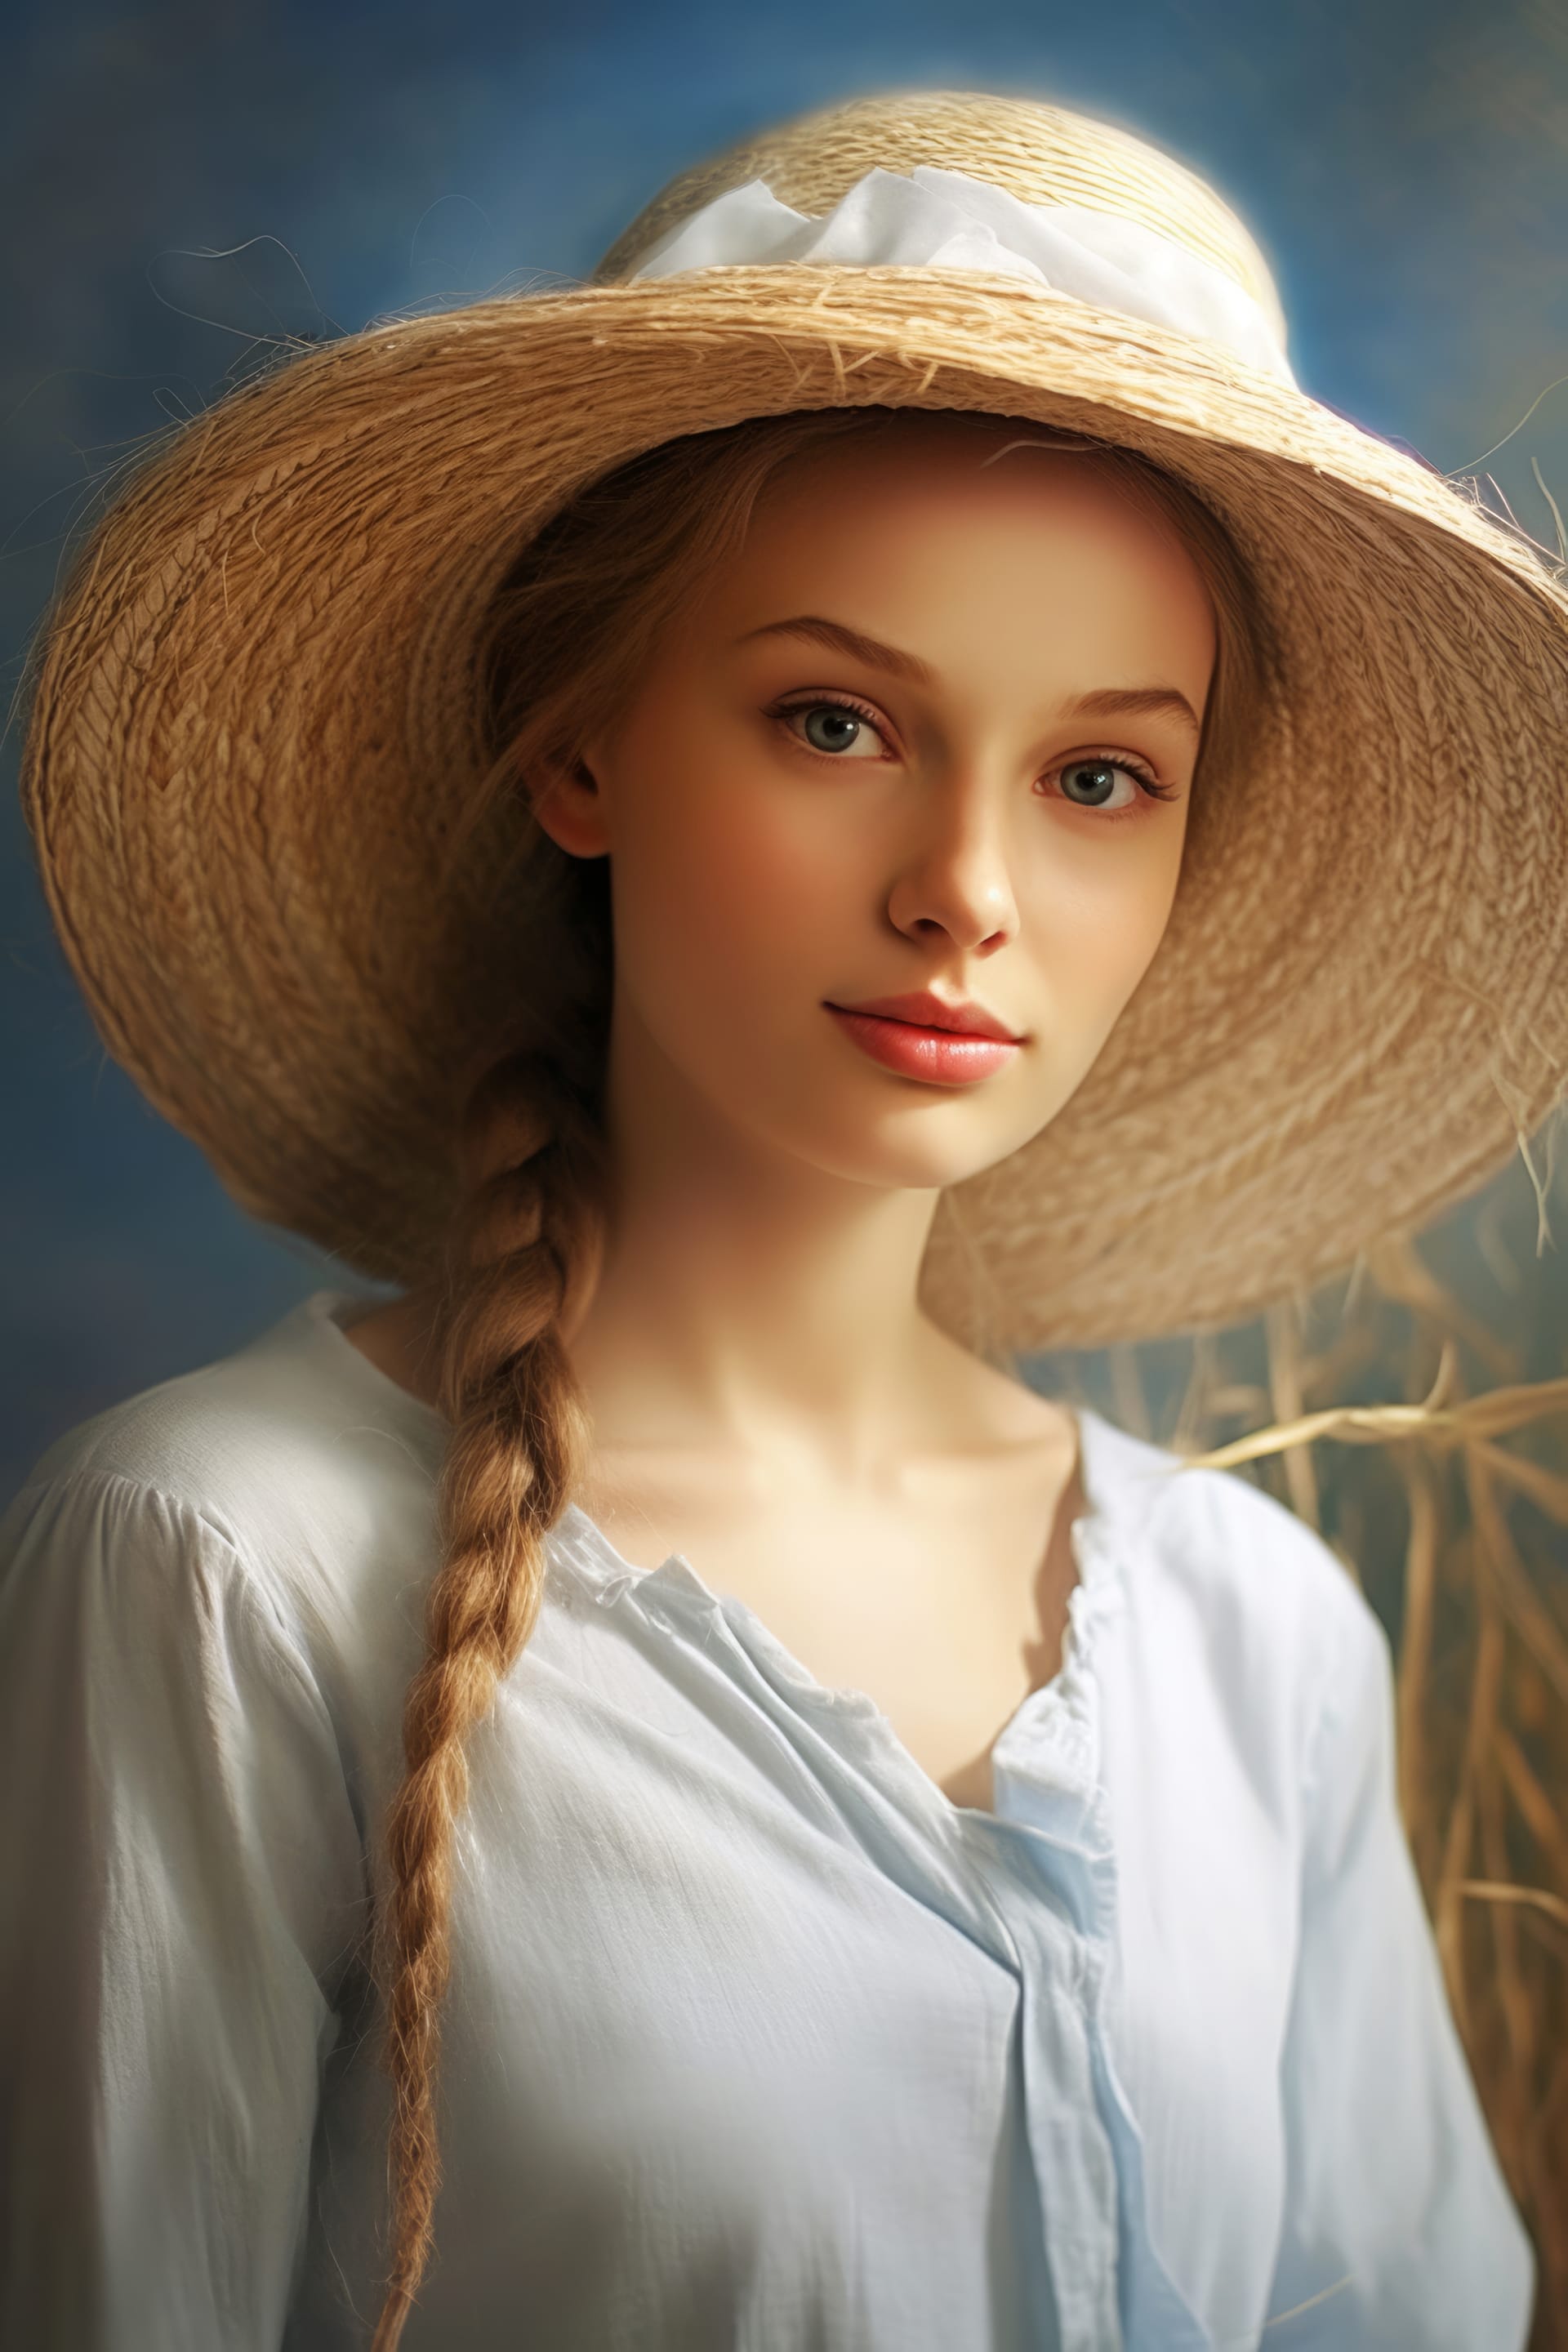 Girl with straw hat free profile picture